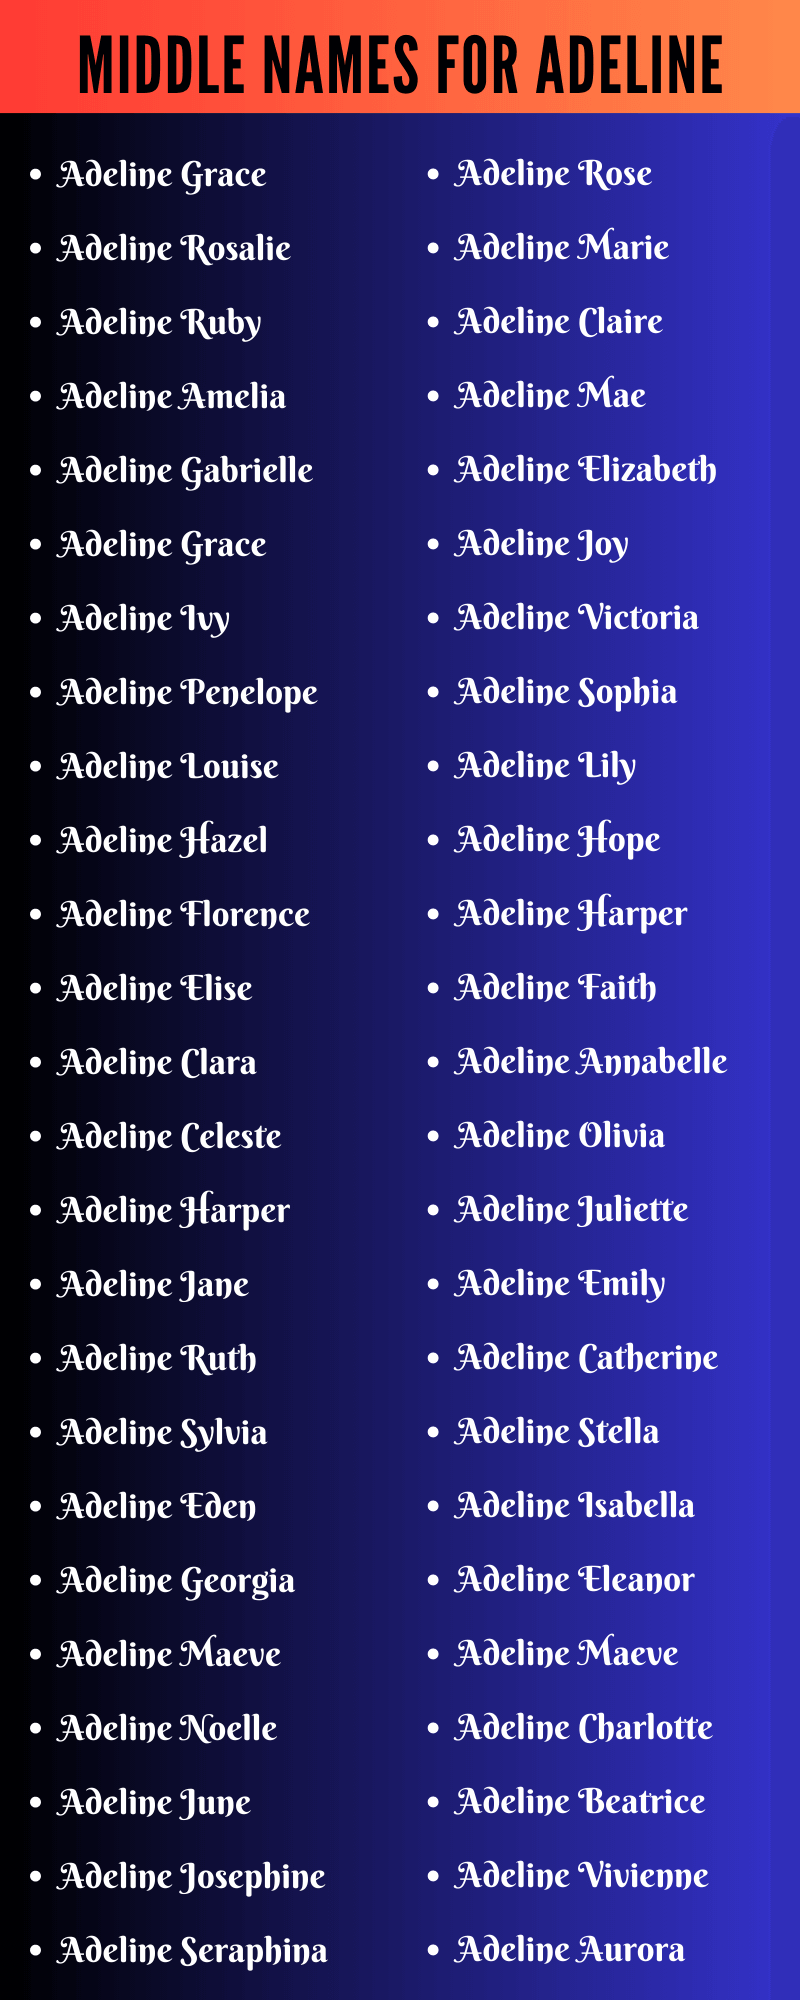 Middle Names For Adeline